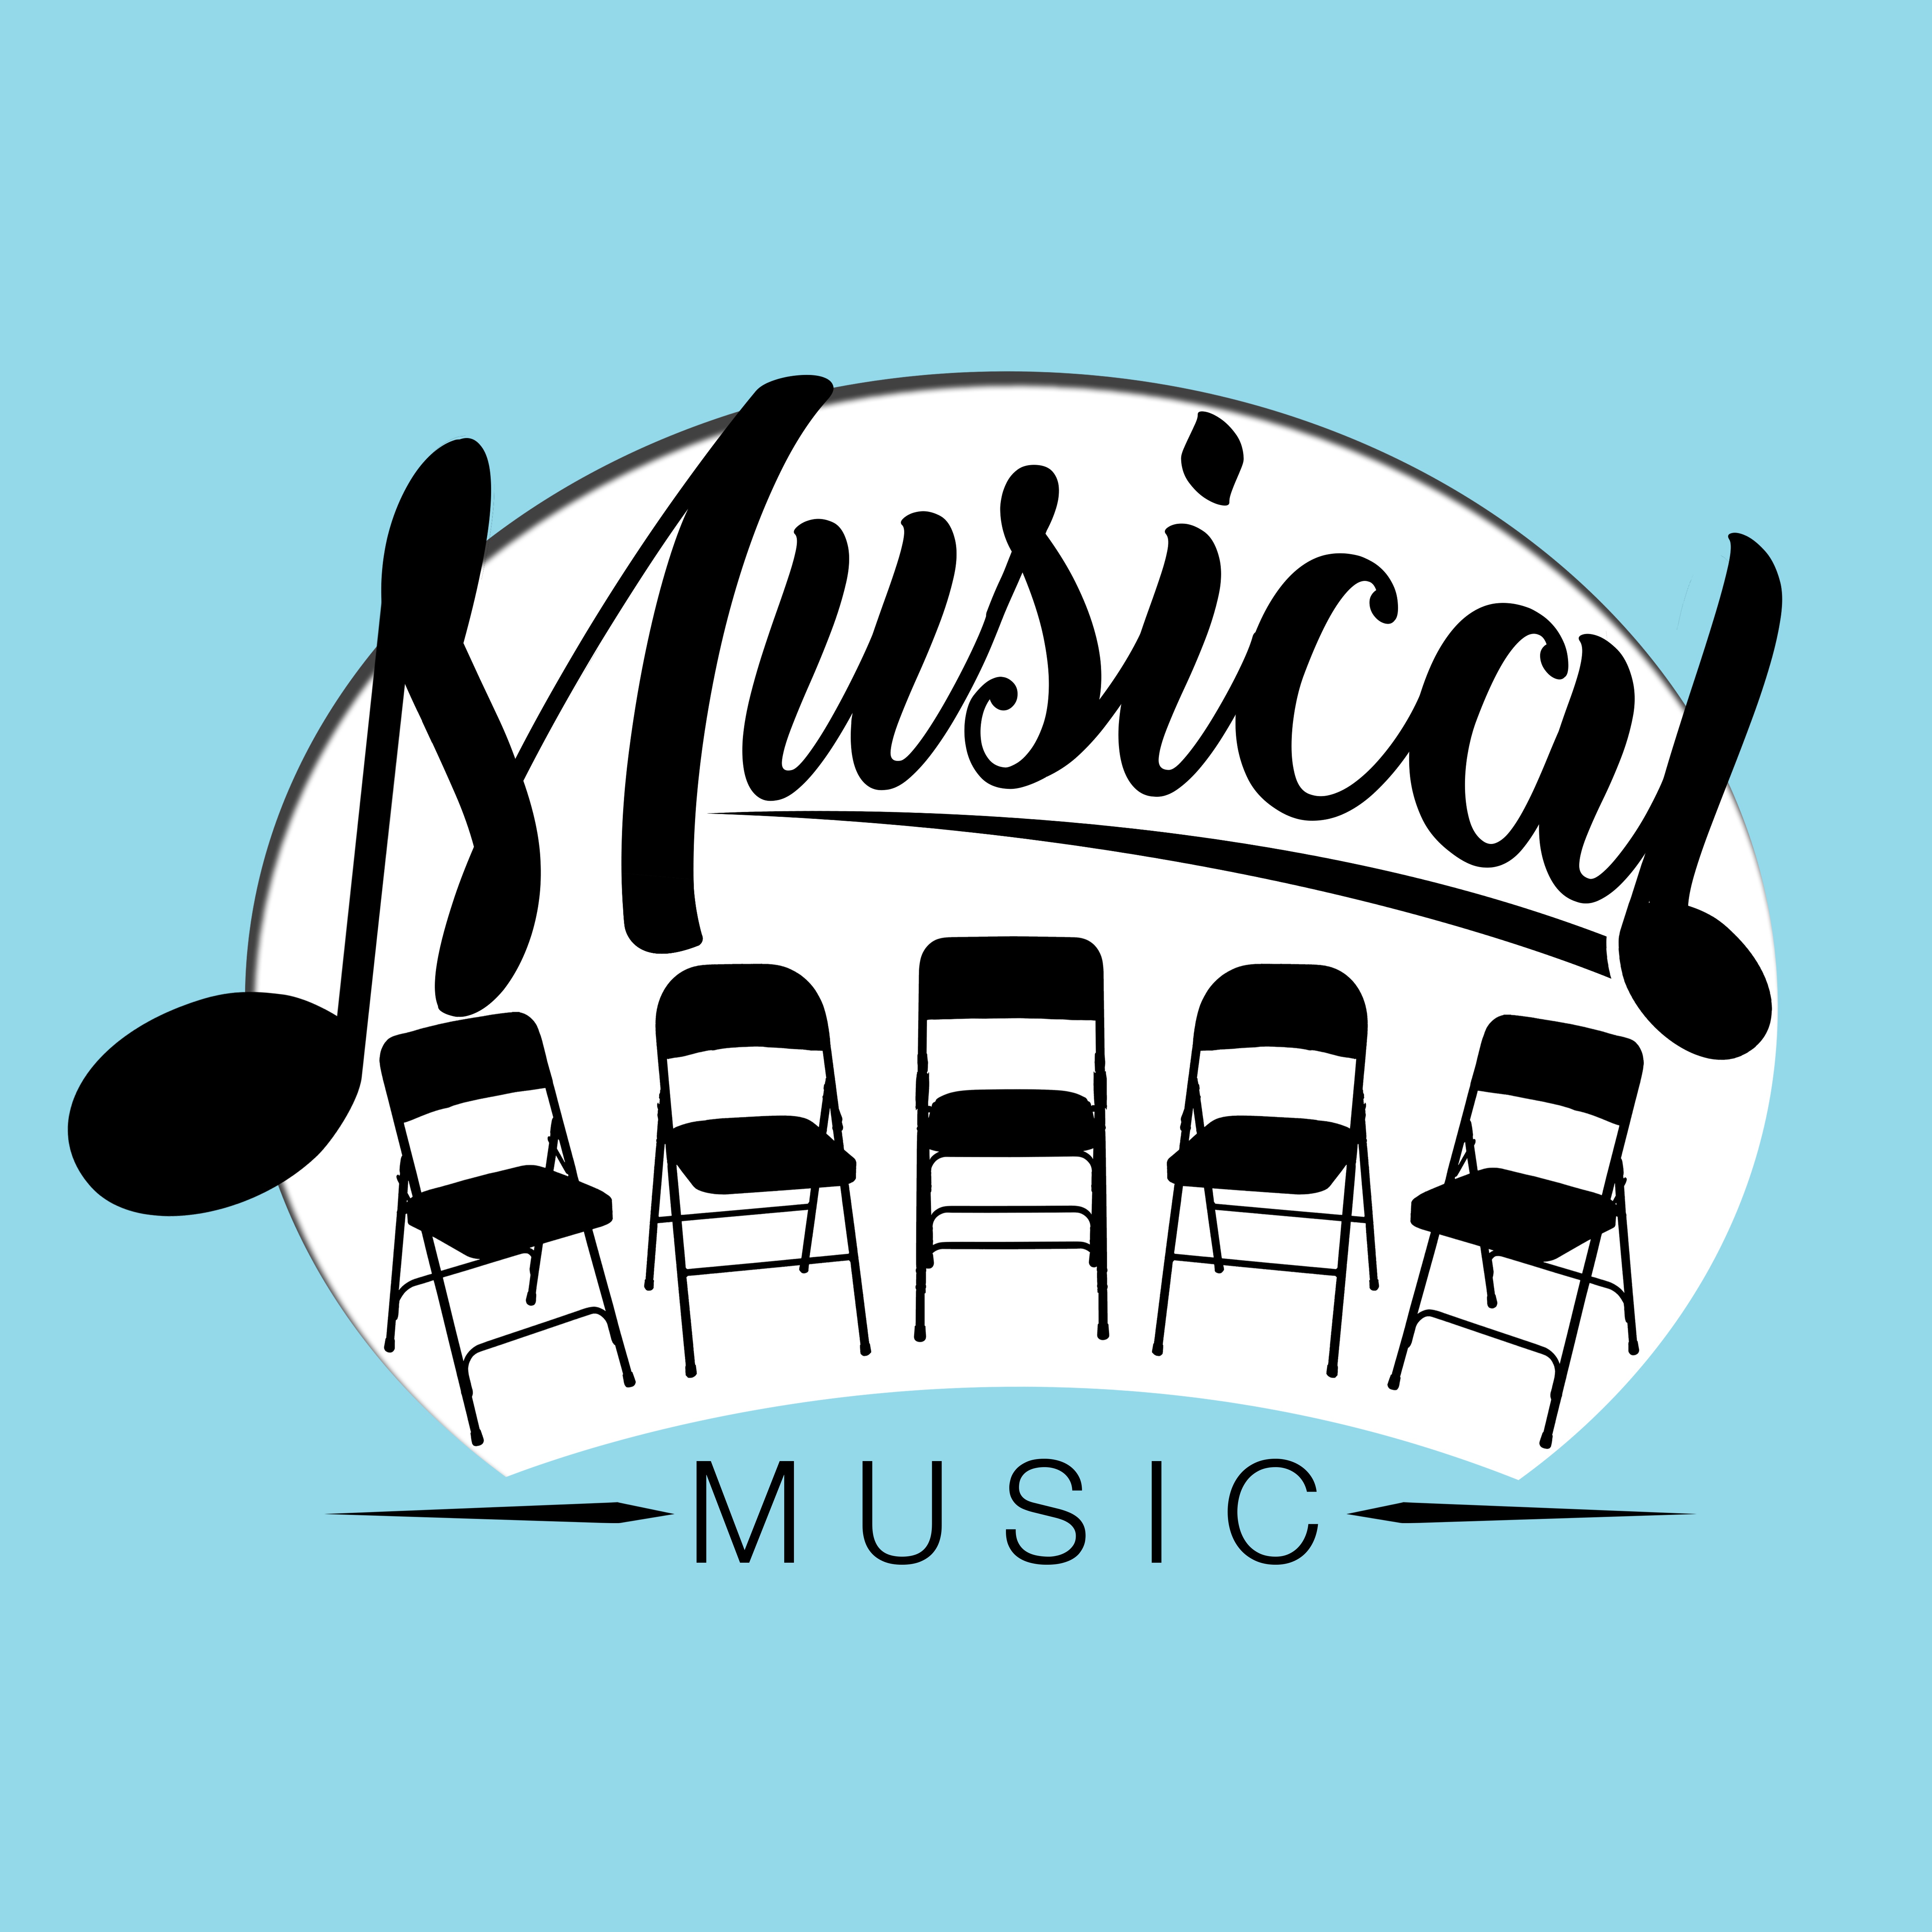 A Hot New Style Of Beats Production By Musical Chairs Music Group